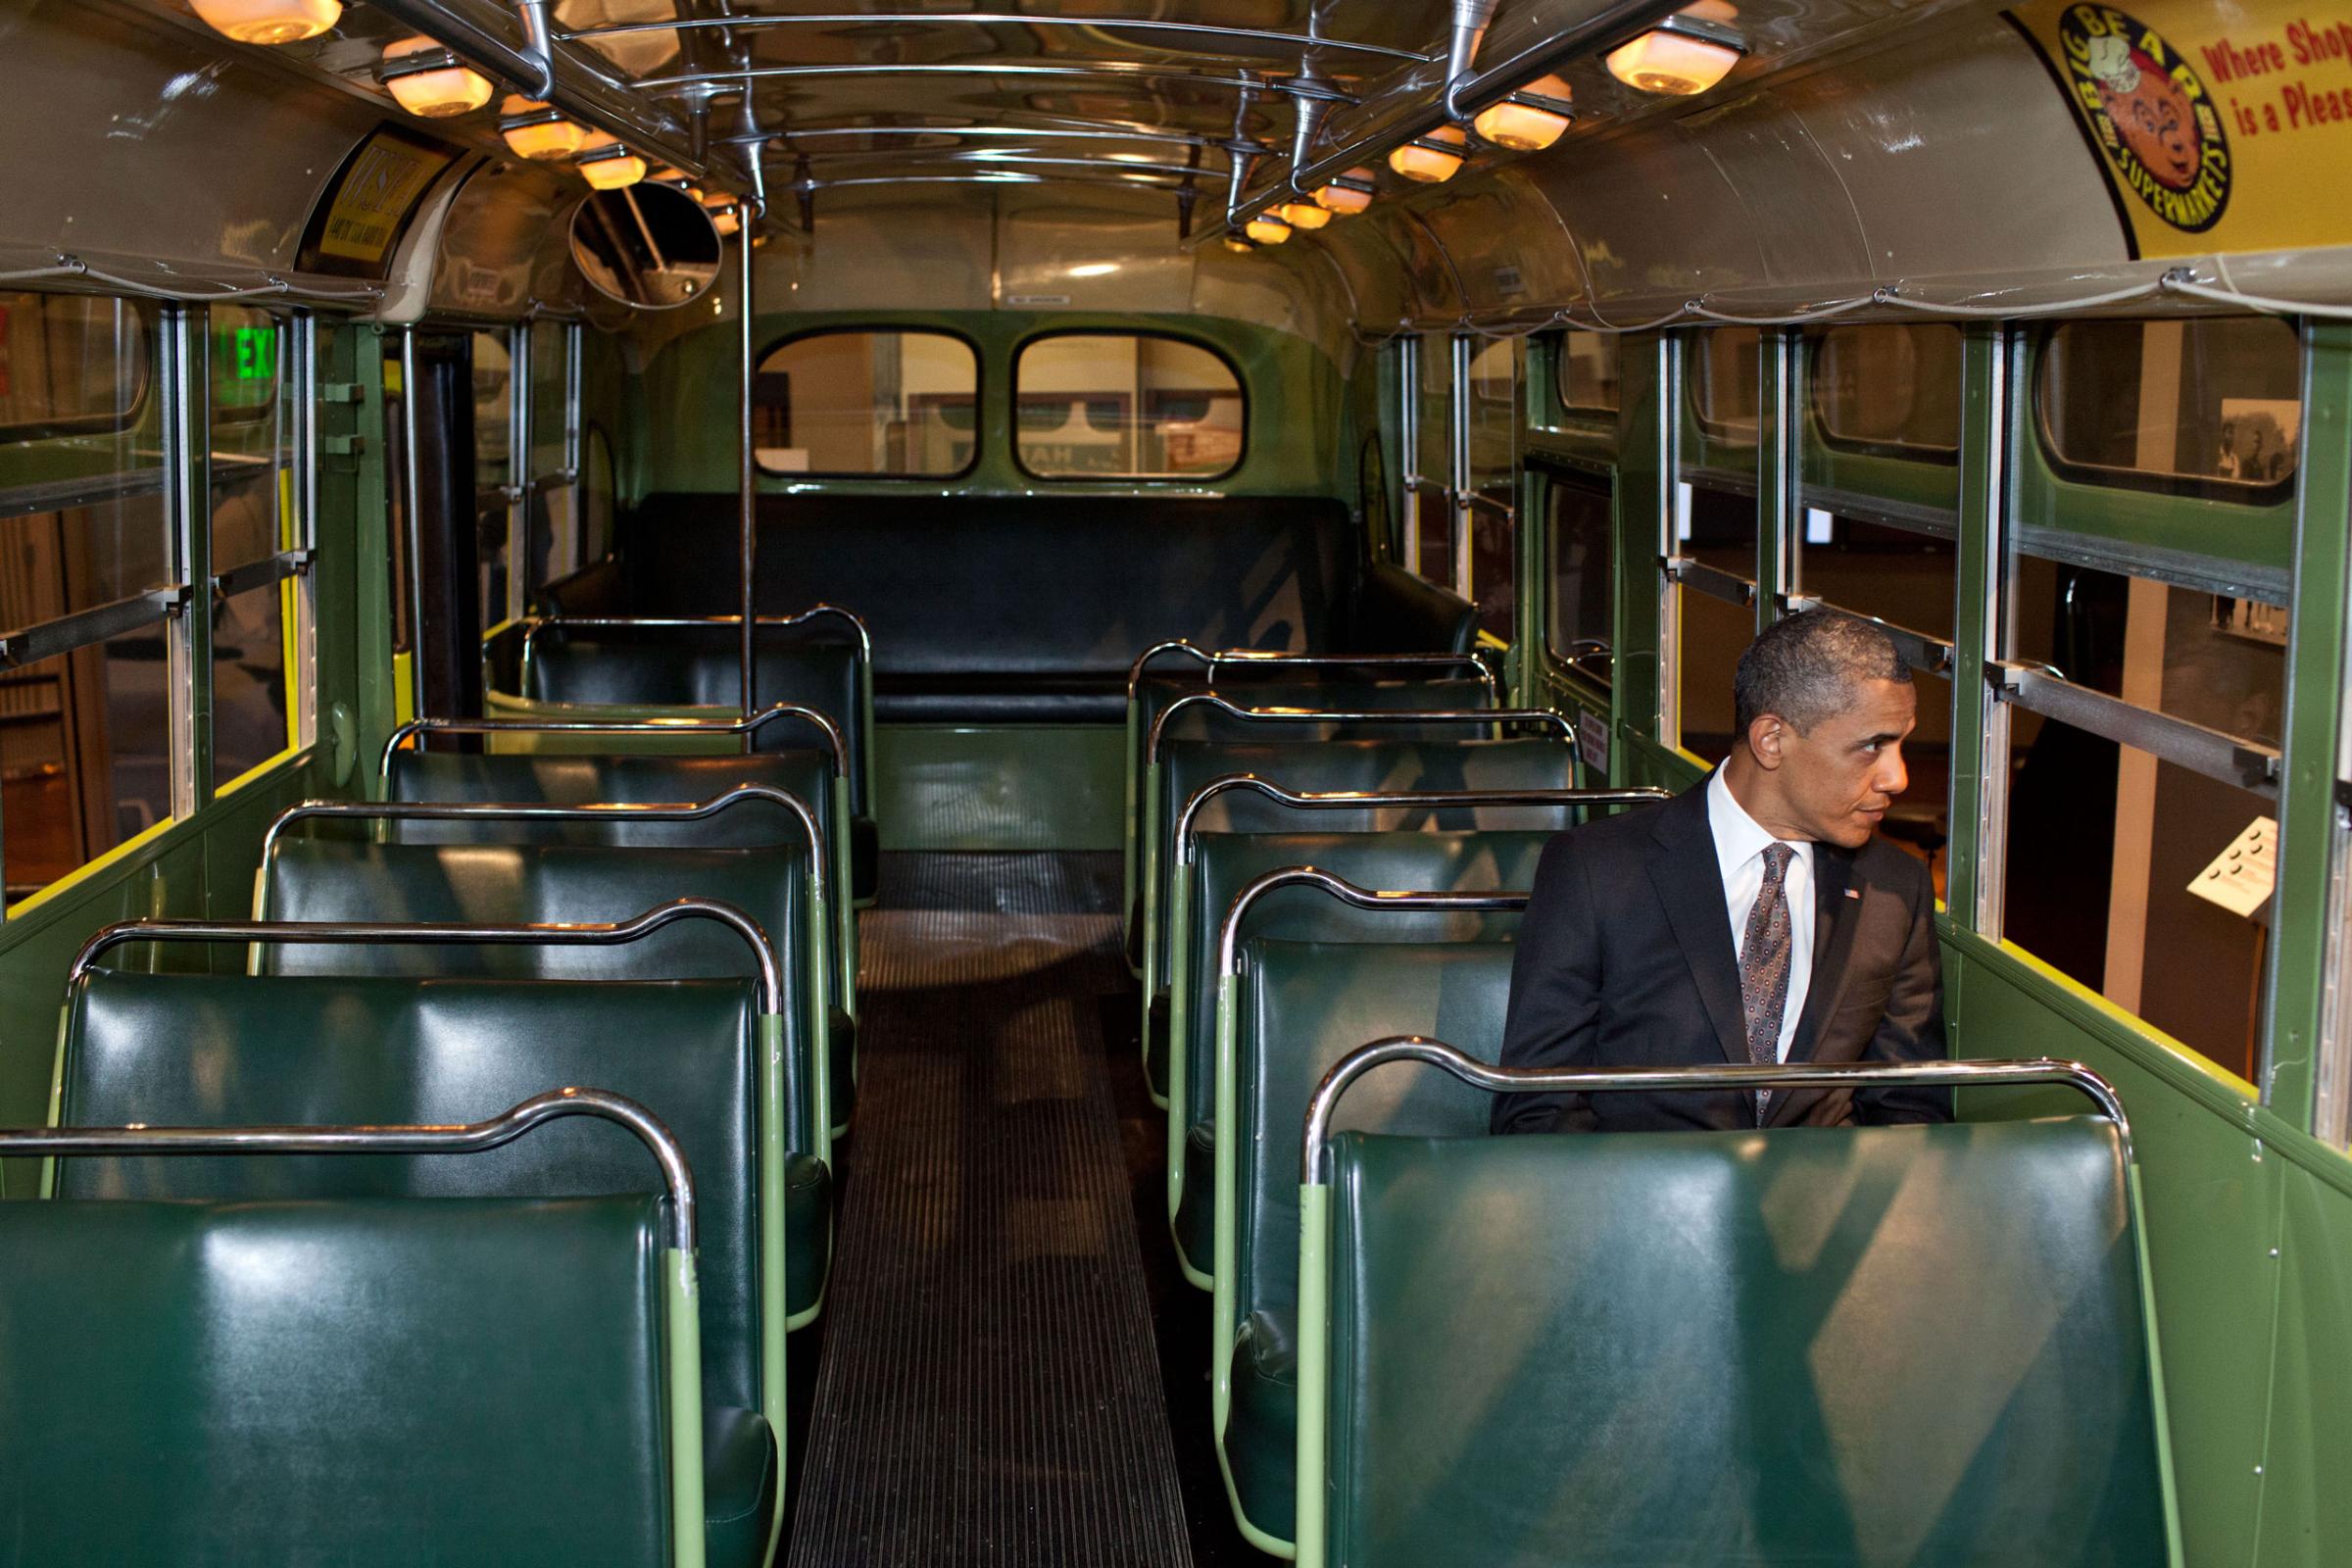 "We were doing an event at the Henry Ford Museum in Dearborn, Mich. Before speaking, the President was looking at some of the automobiles and exhibits adjacent to the event, and before I knew what was happening he walked onto the famed Rosa Parks bus. He sat in one of the seats, looking out the window for only a few seconds." April 18, 2012